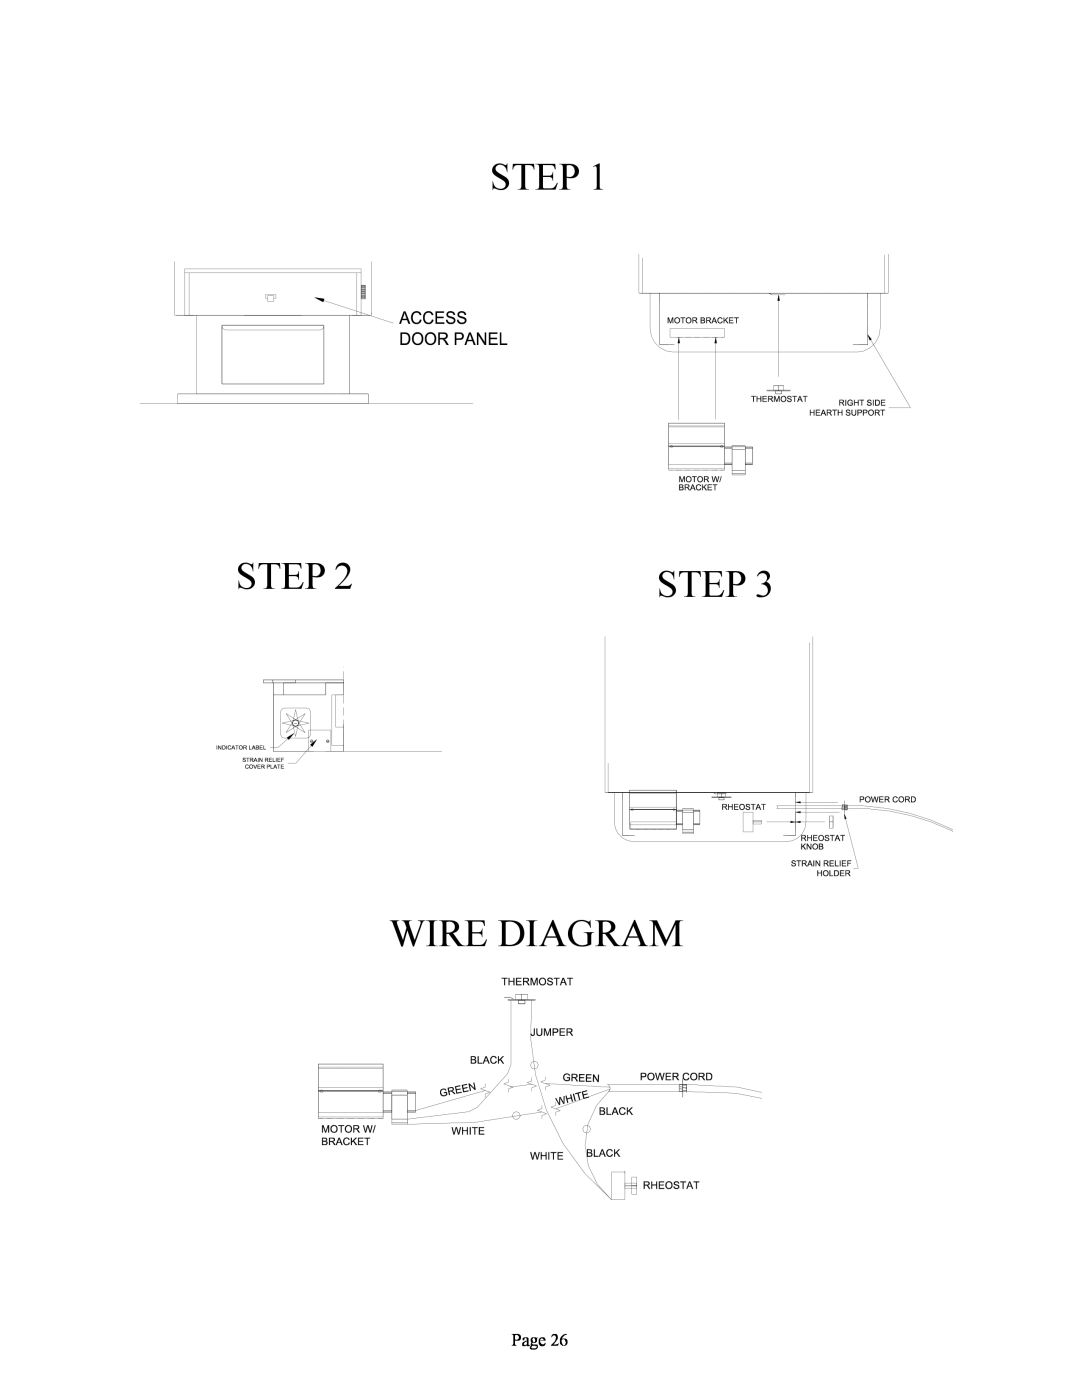 New Buck Corporation FS 21 installation instructions Step, Wire Diagram, Page 